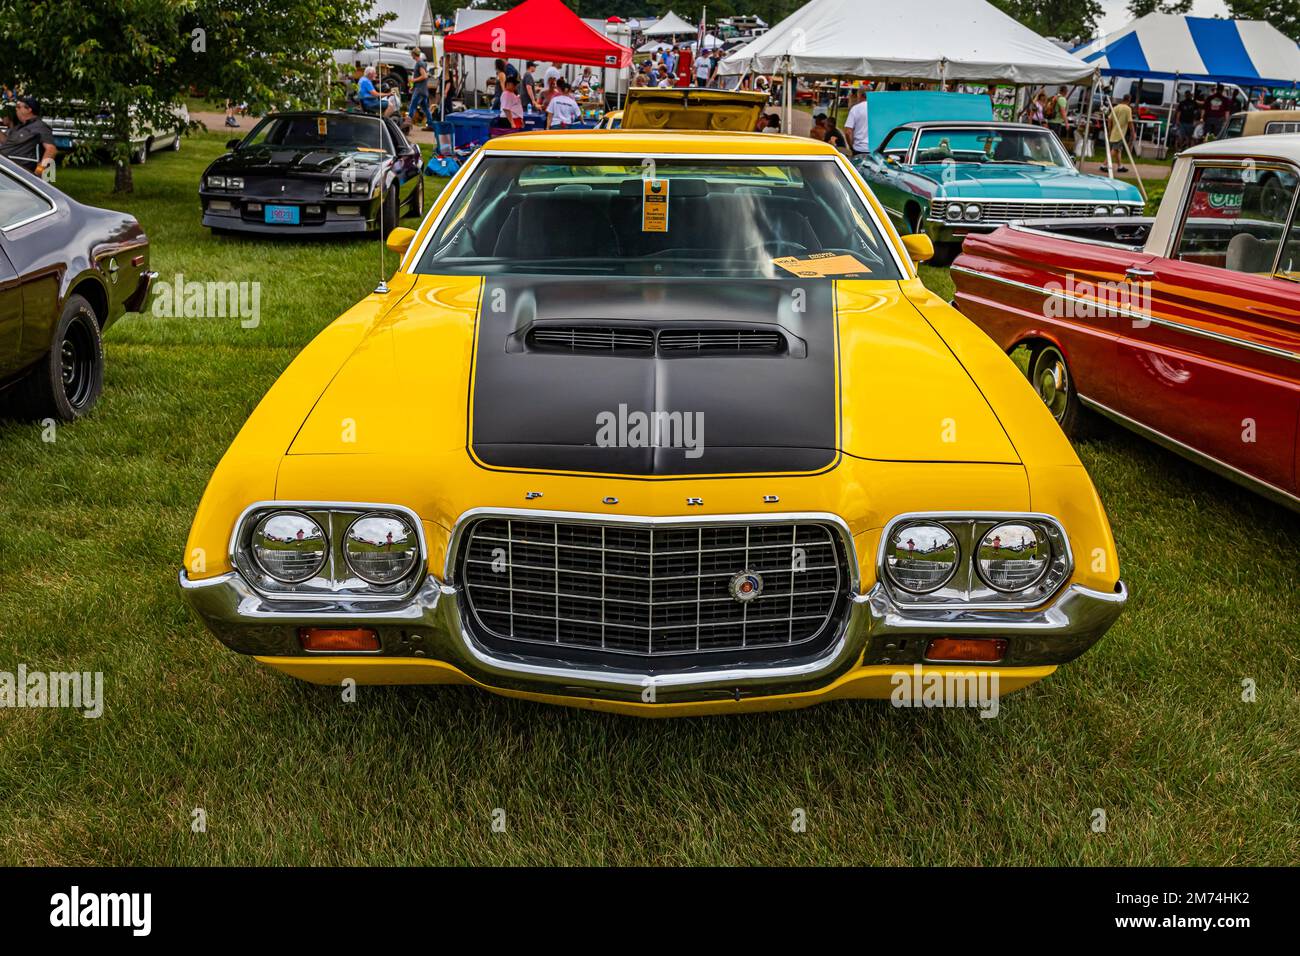 Iola, WI - July 07, 2022: High perspective front view of a 1972 Ford Gran Torino Sport Coupe at a local car show. Stock Photo